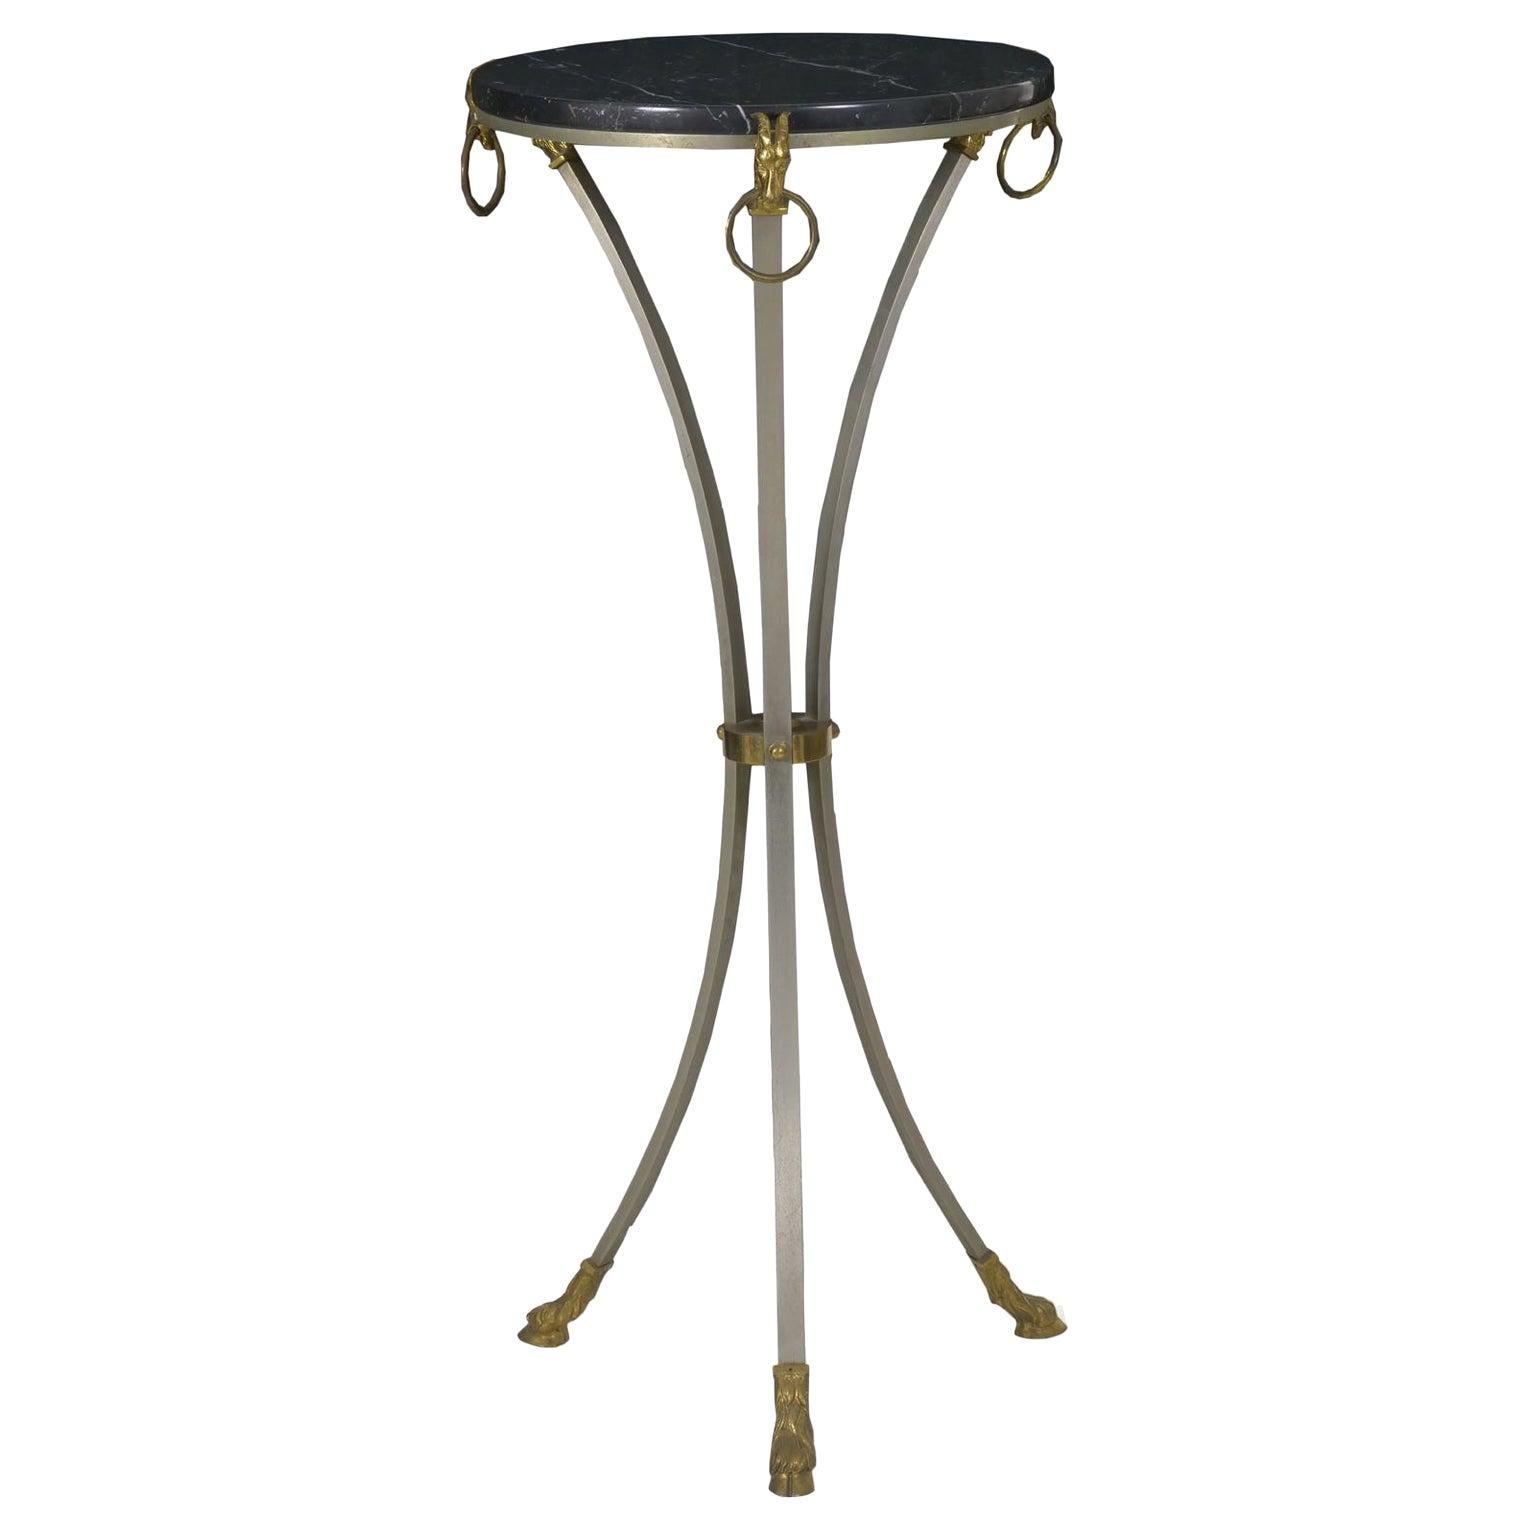 French Neoclassical Steel and Brass Antique Accent Table in Maison Jansen Style